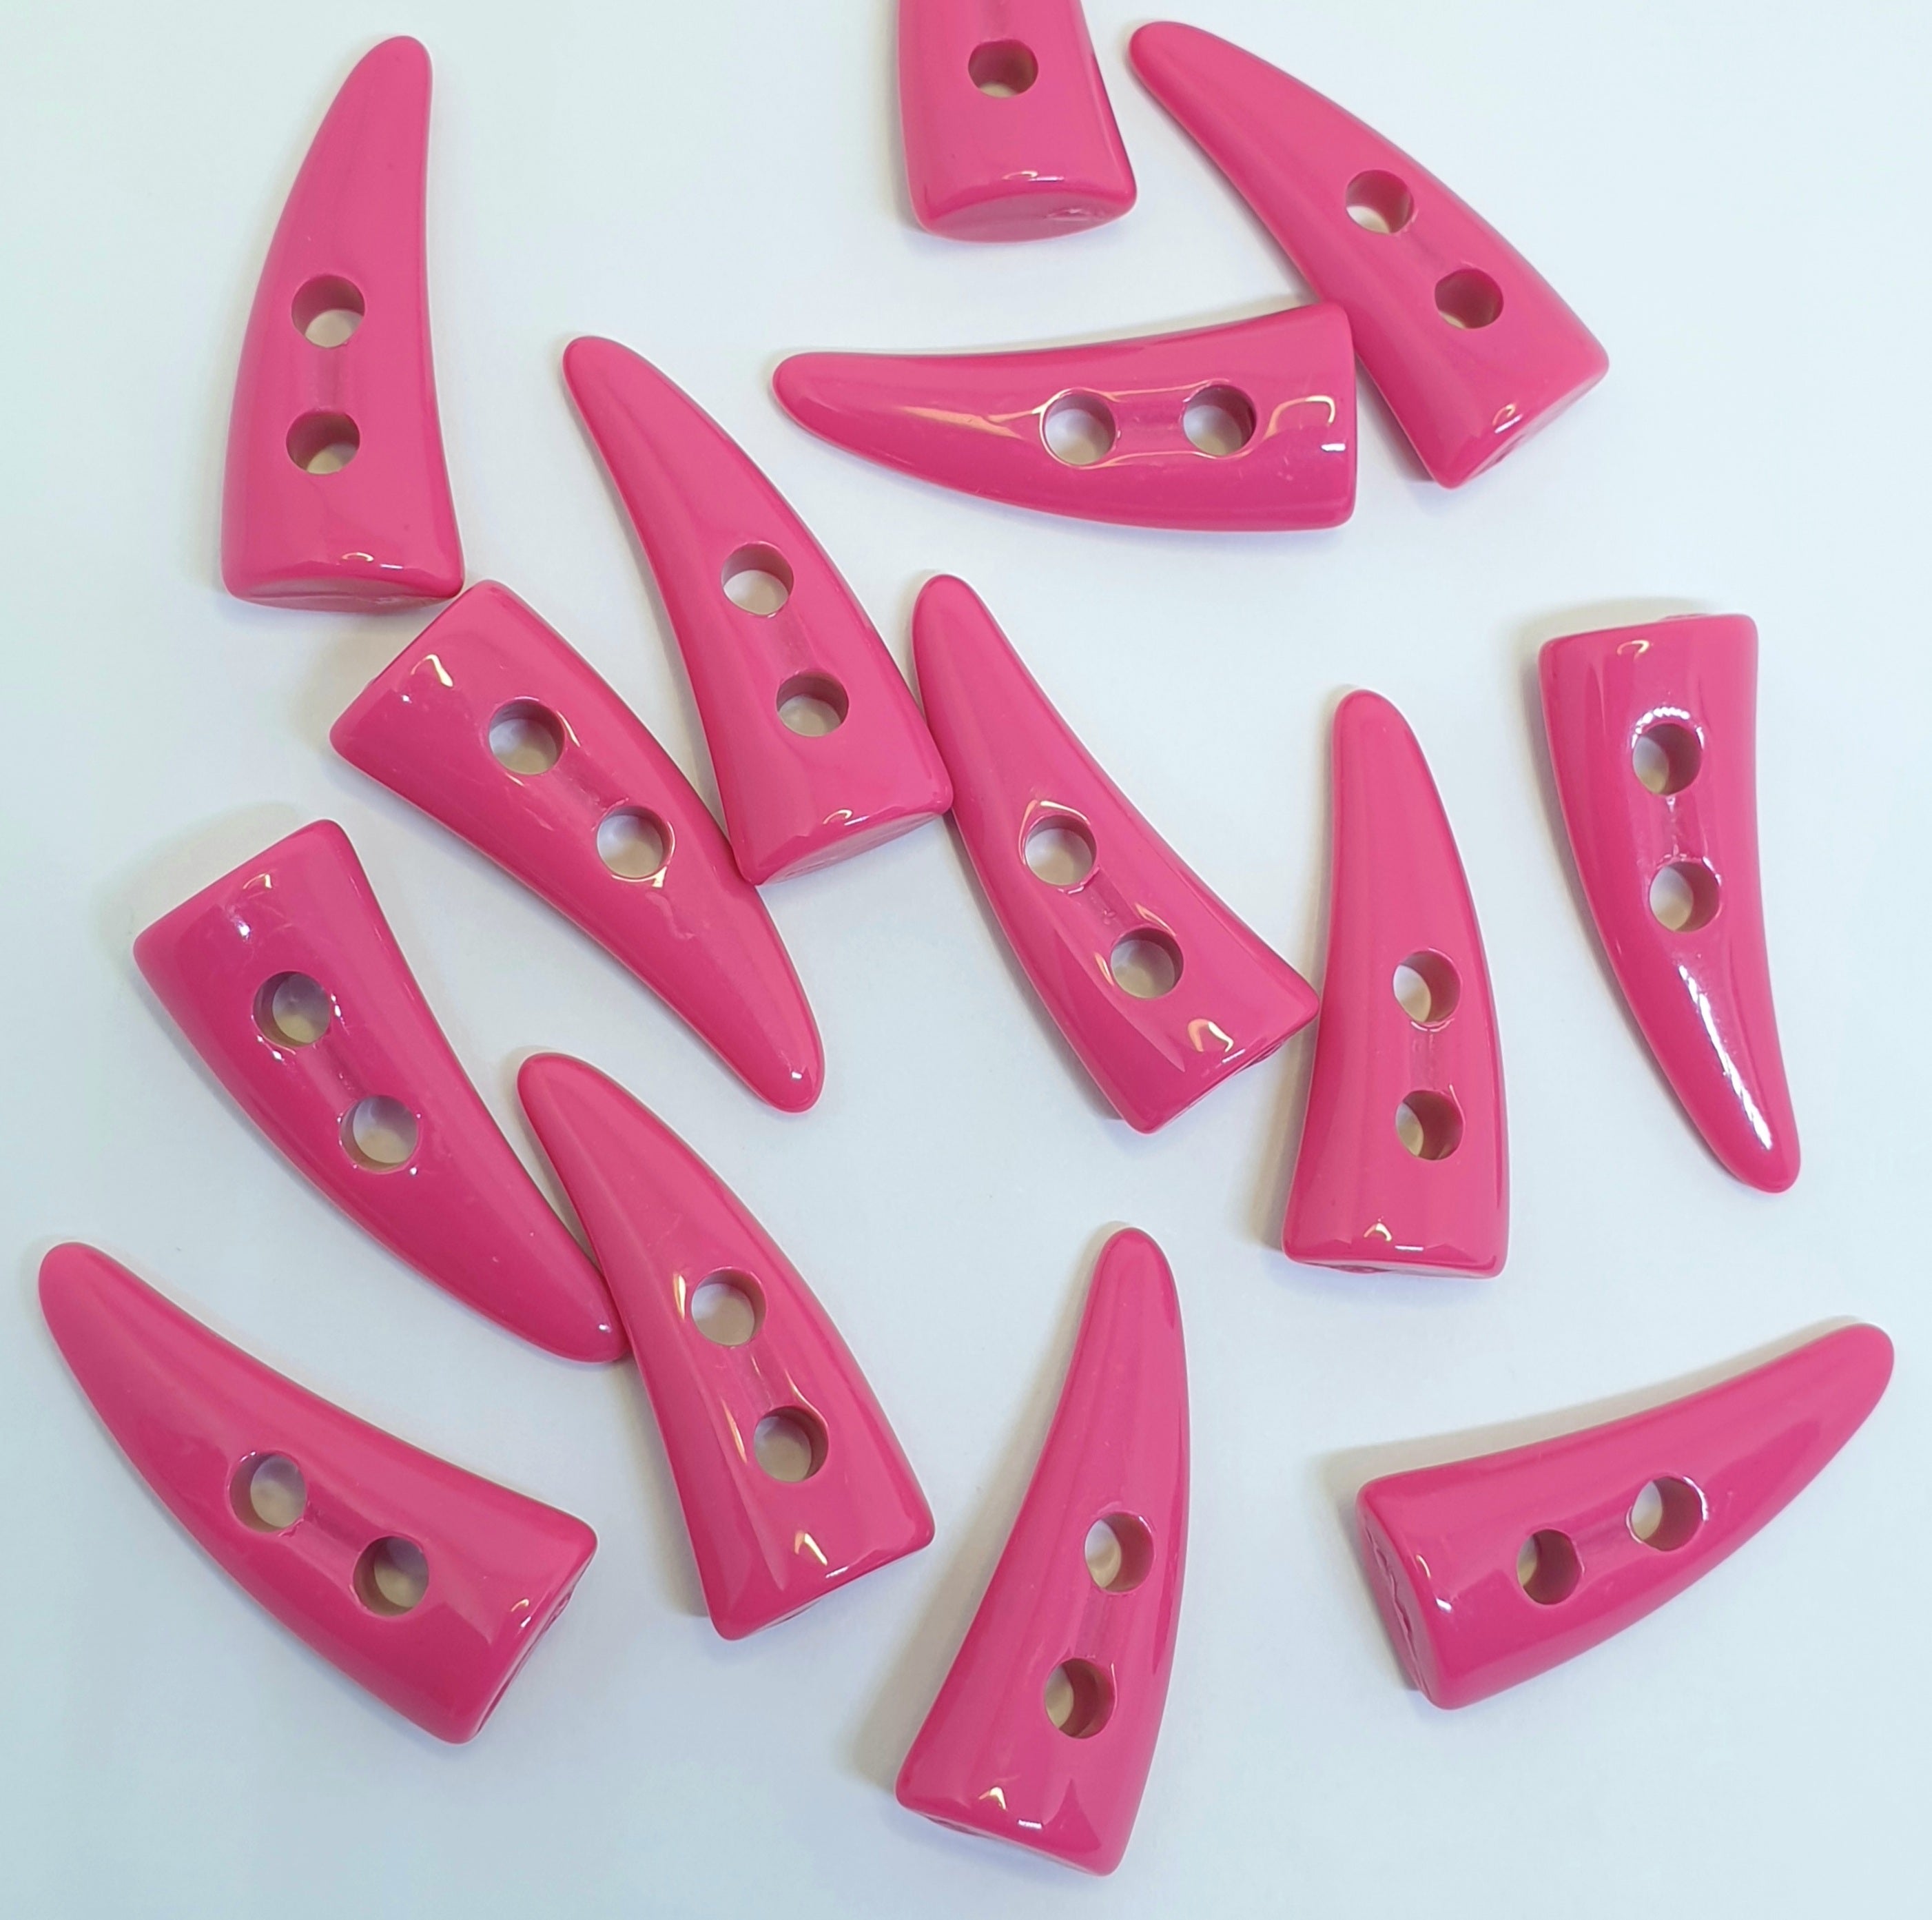 MajorCrafts 16pcs 30mm Hot Pink Horn/Tooth Shaped 2 Holes Sewing Toggle Acrylic Buttons